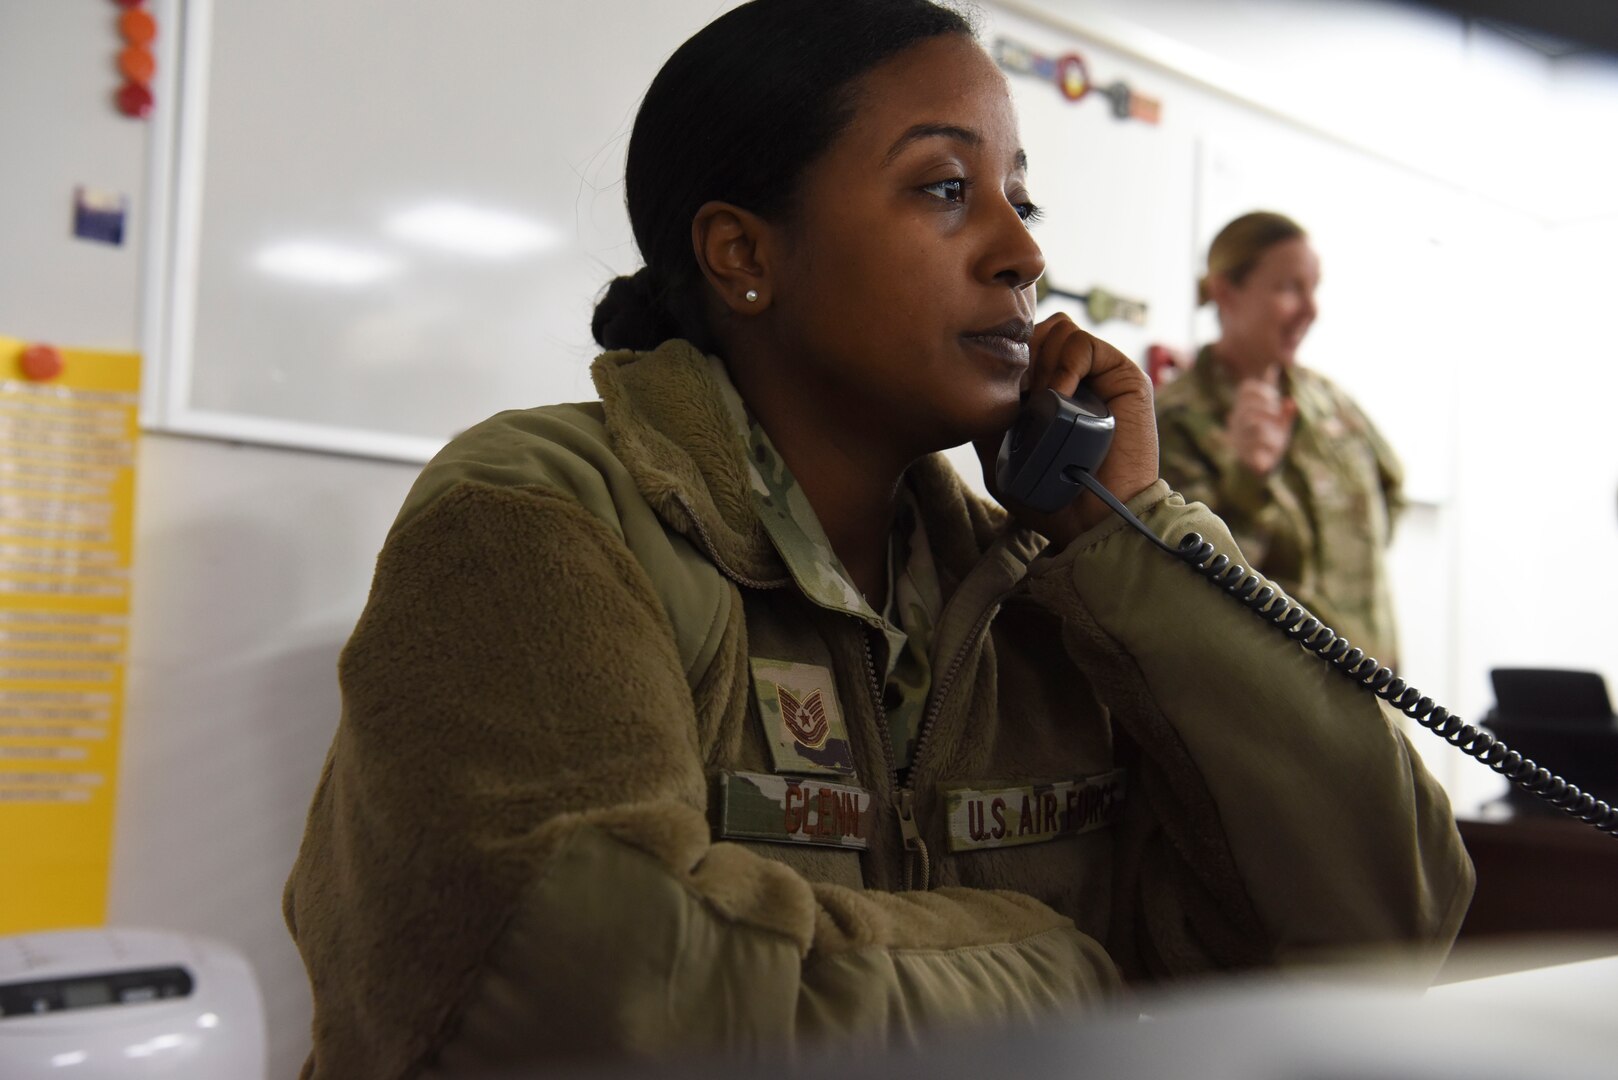 Tech. Sgt. Kathryn Glenn, 380th Expeditionary Logistics Readiness Squadron NCOIC, logistics plans, answers a call about redeployments at Al Dhafra Air Base, United Arab Emirates, Mar. 14, 2019.